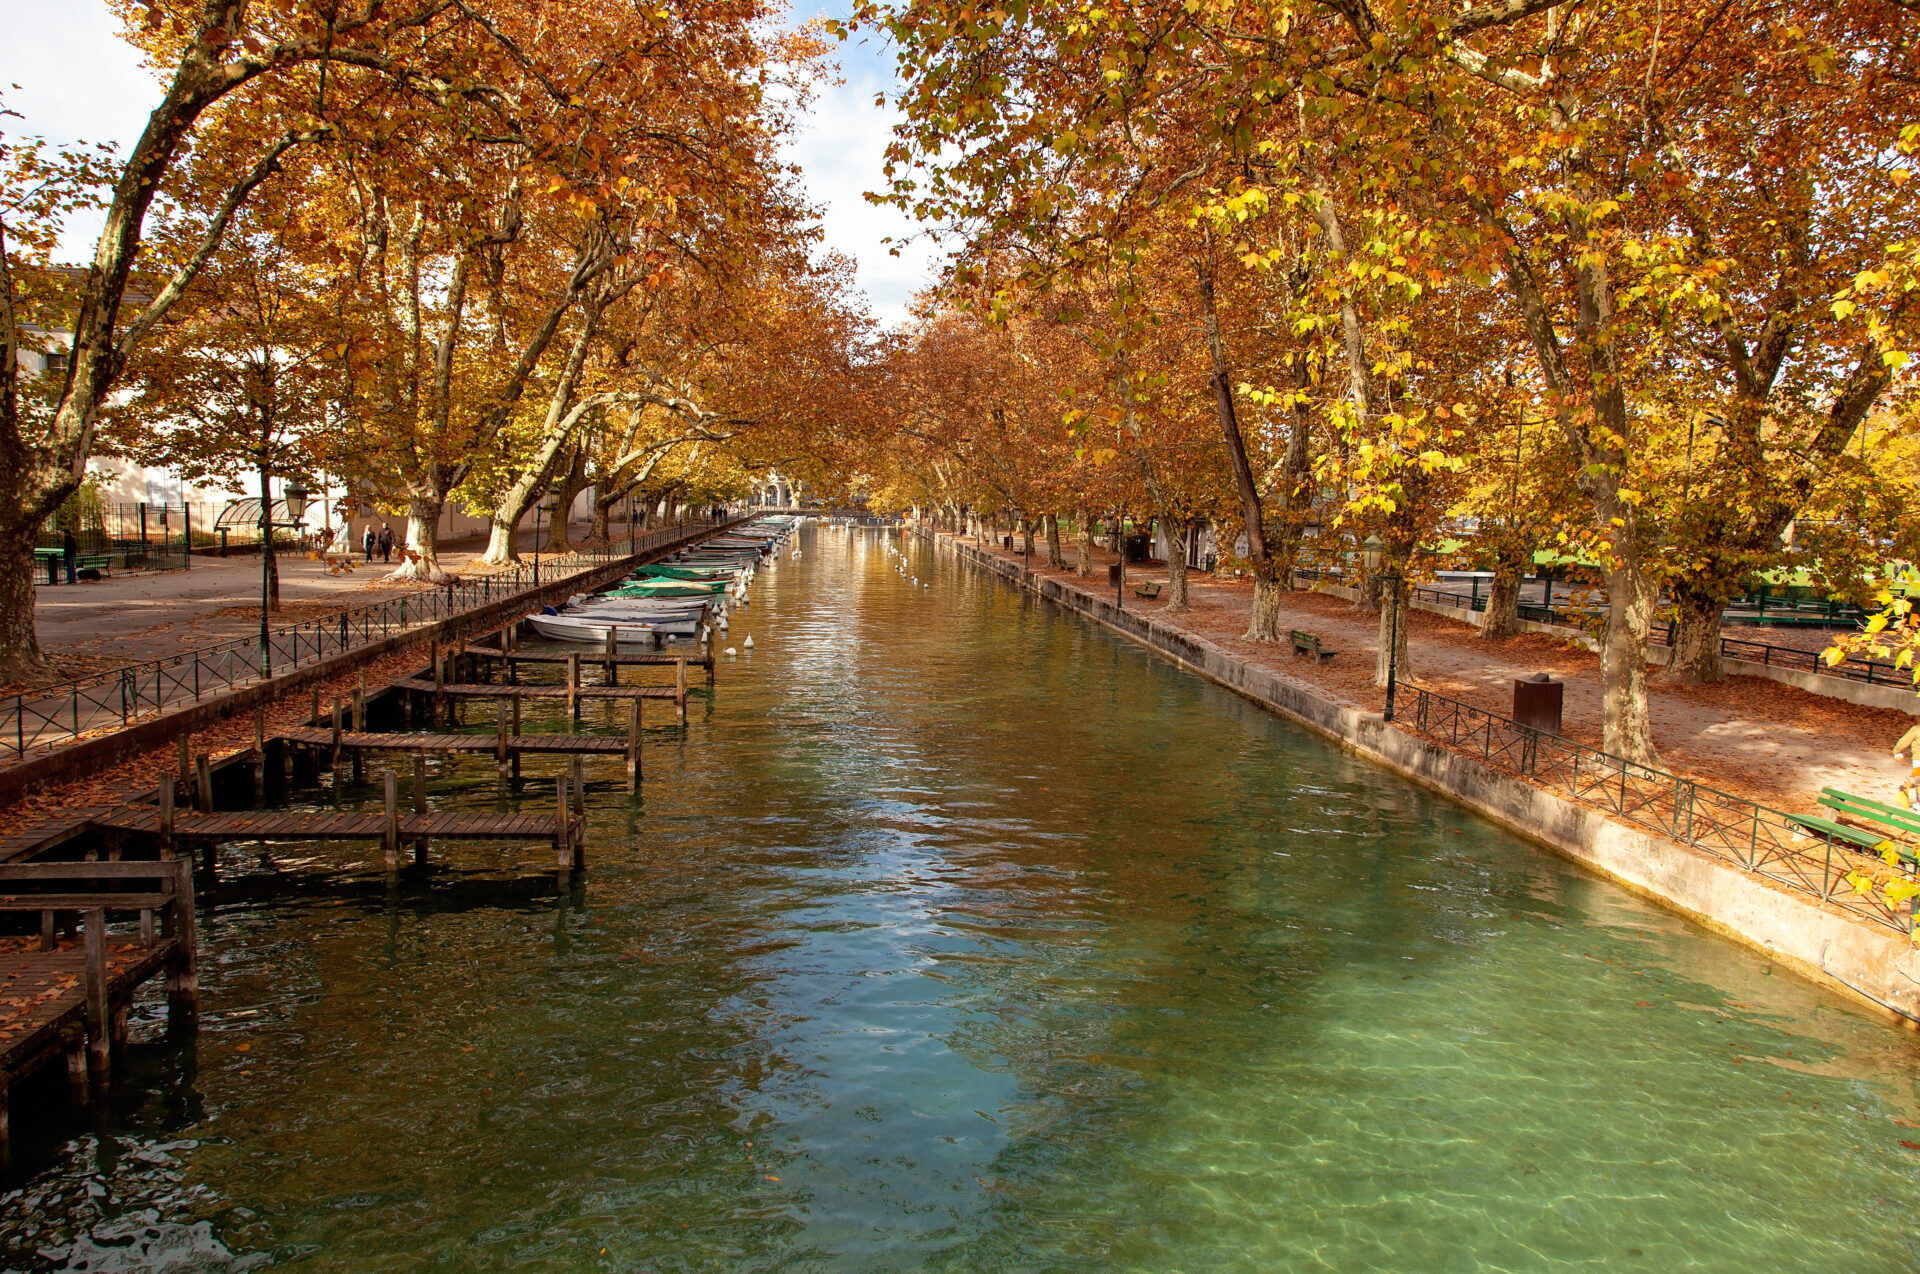 View to the Annecy lake and channel with boats in autumn